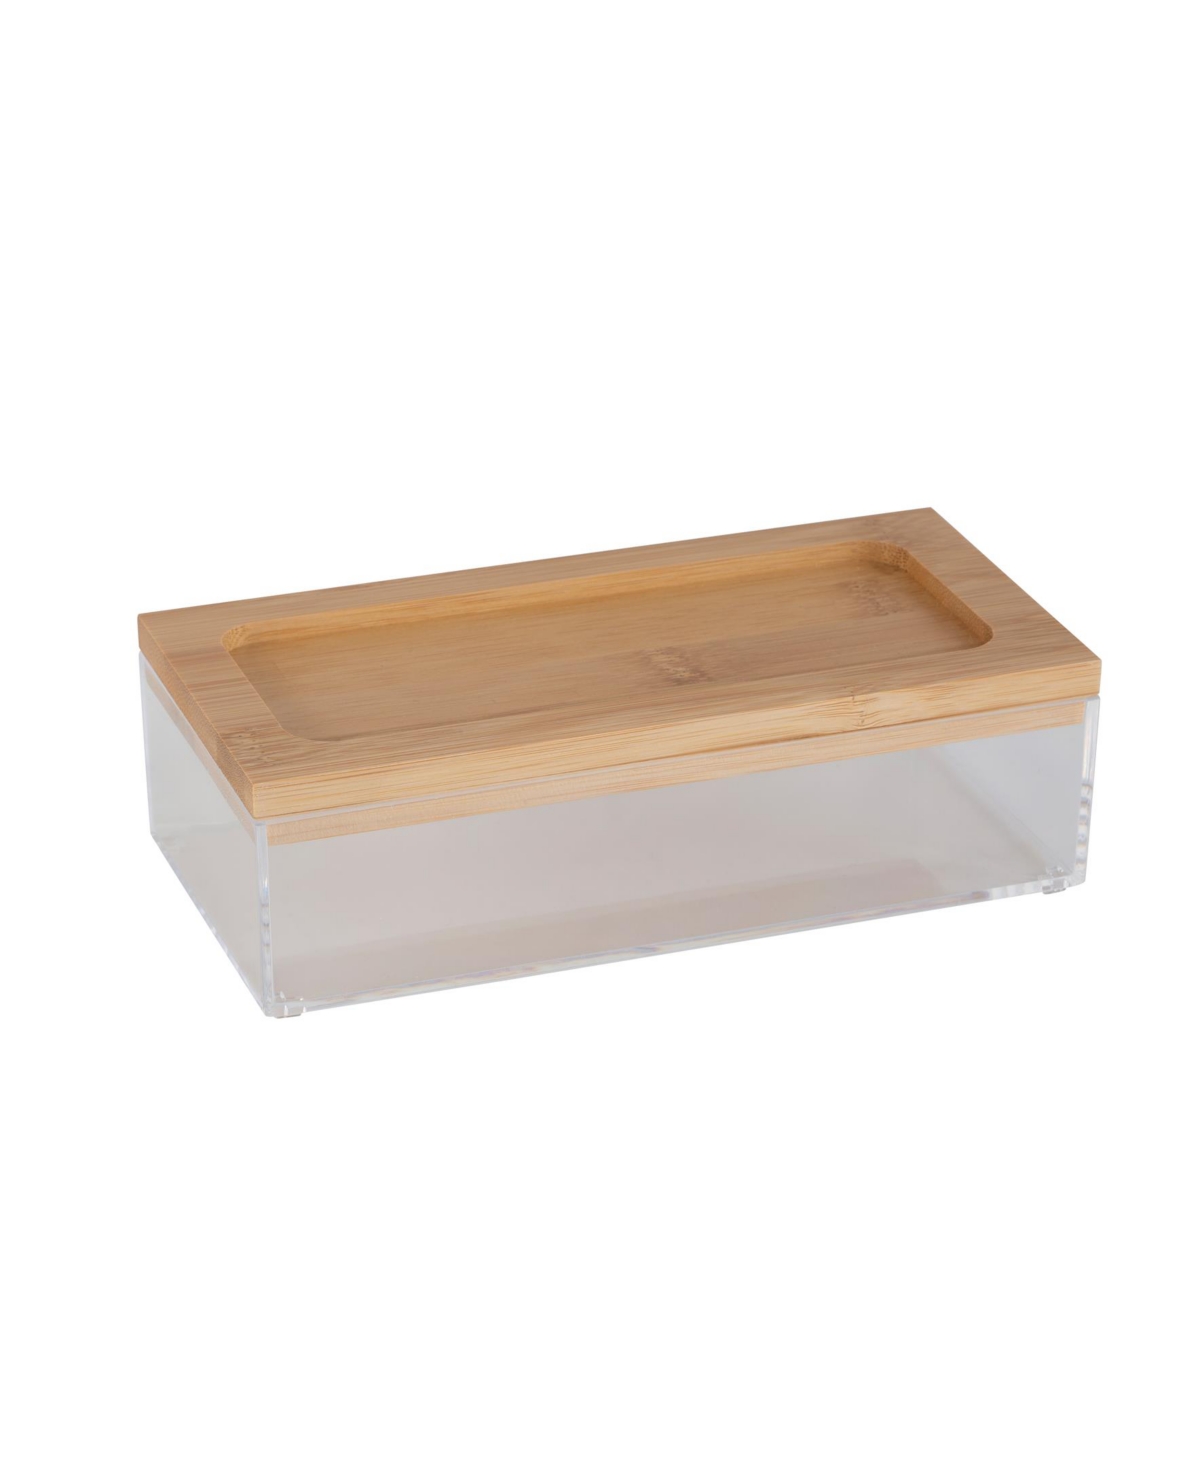 Medium Organizer with Bamboo Lid - Open Miscellaneous